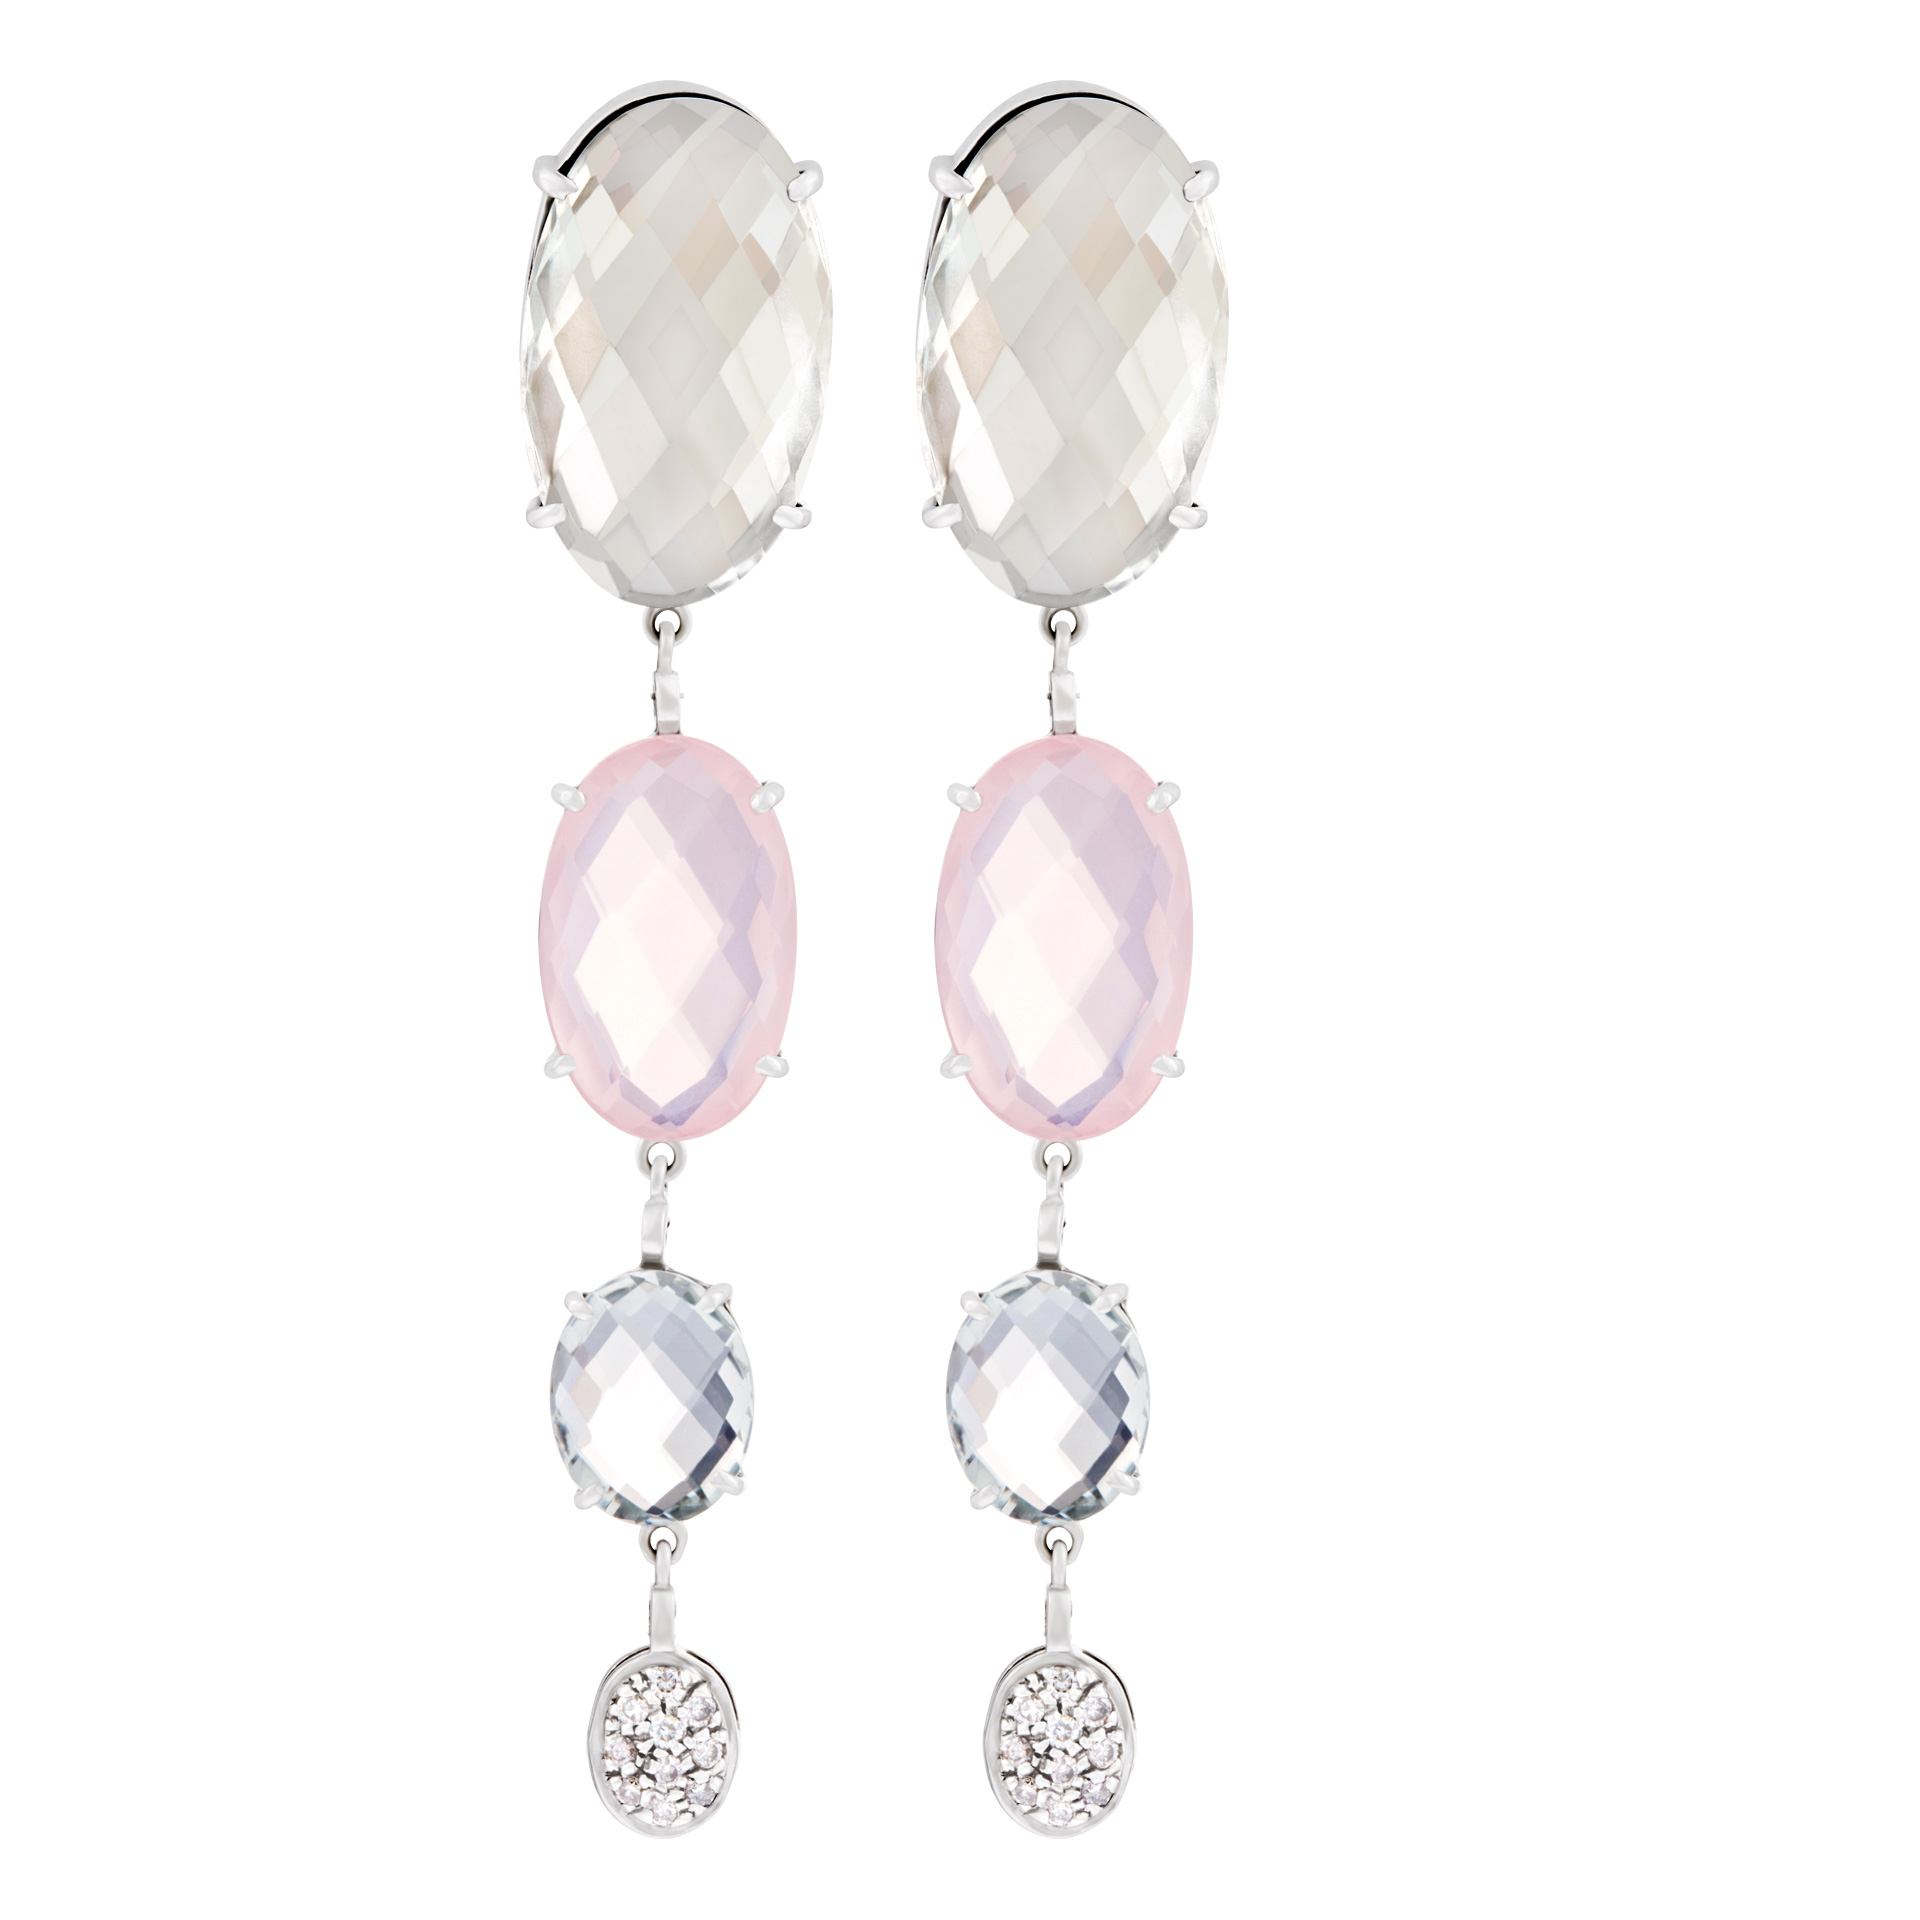  Faceted topaz, pink and smoky quartz dangling earrings with diamond accents image 1